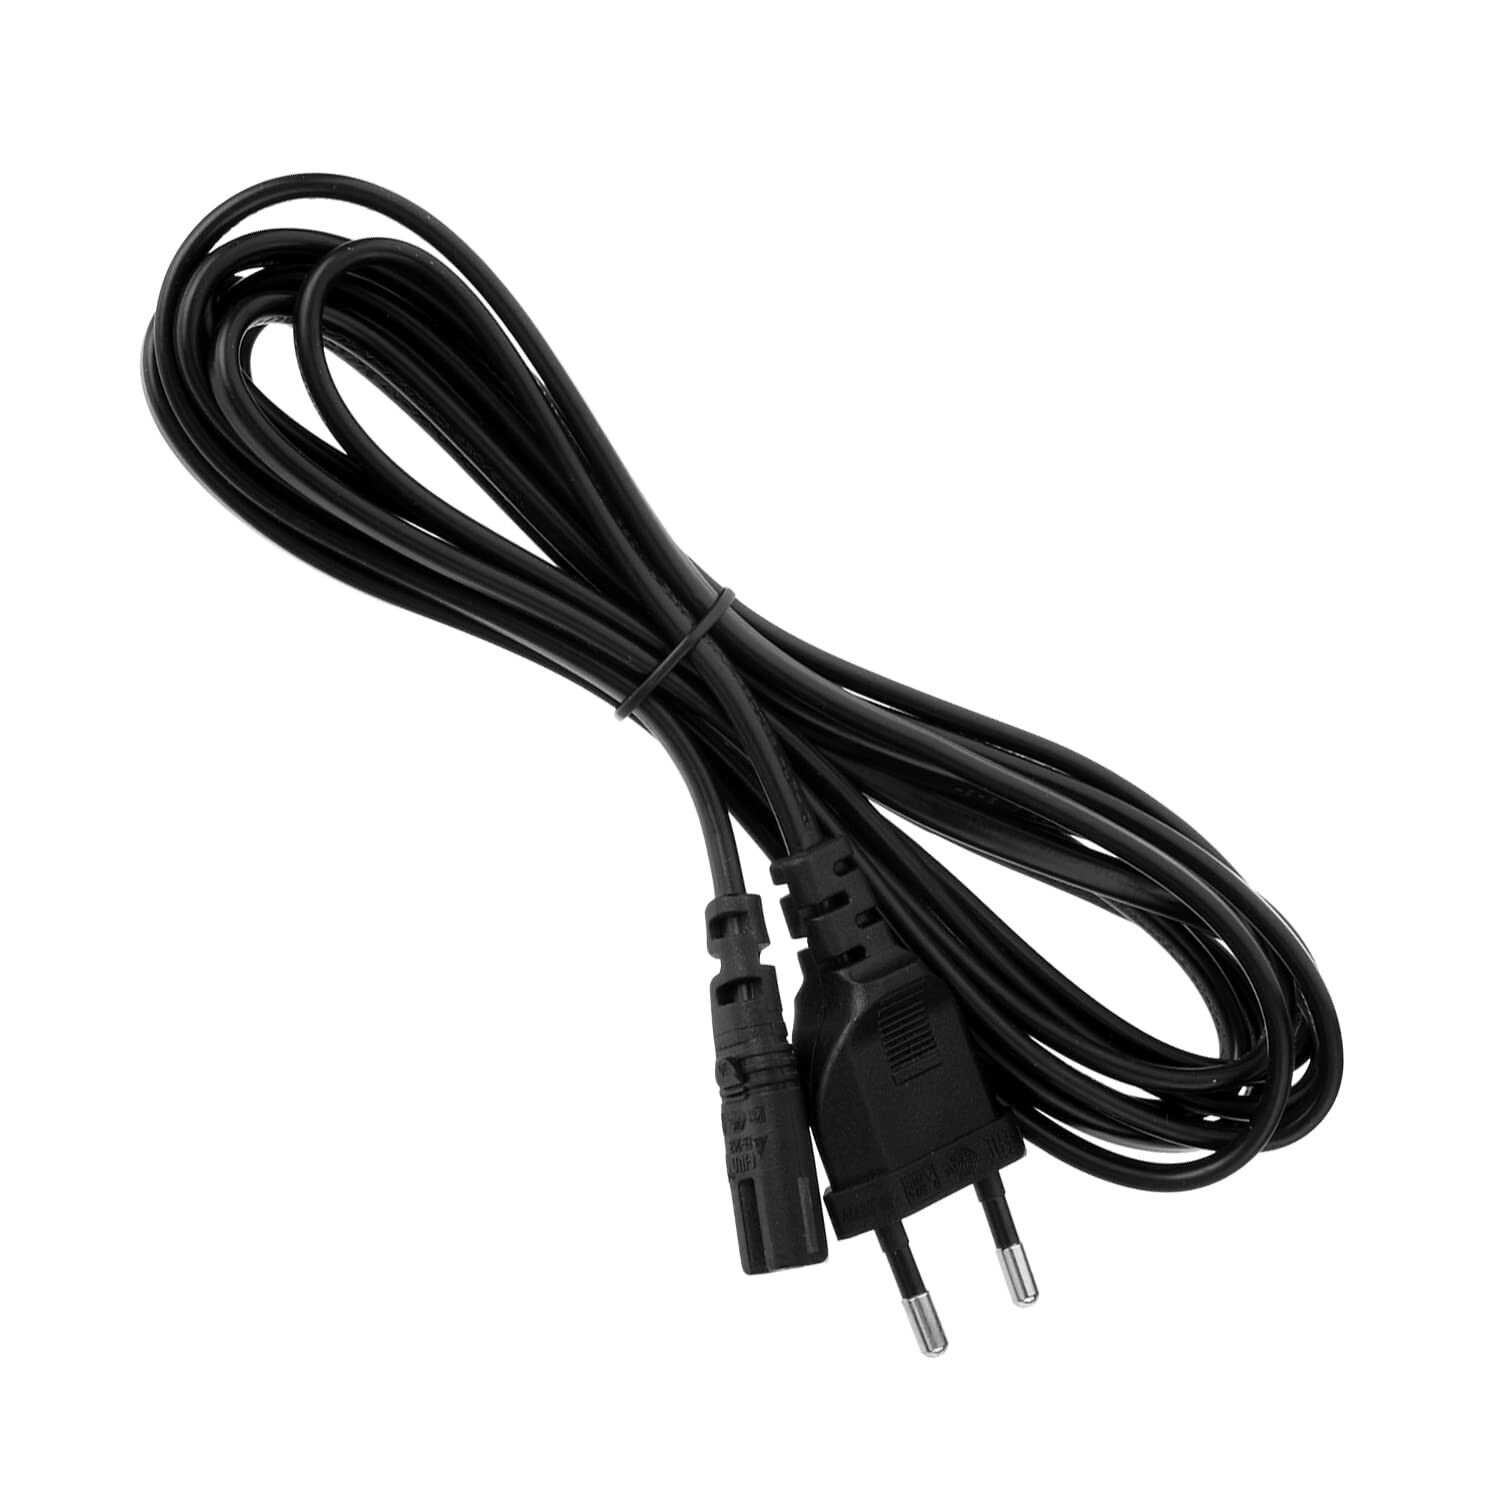 EU Europe C7 6' 2 Prong AC Power Cord Cable Plug for PS3 Slim PS4 Laptop Adapter